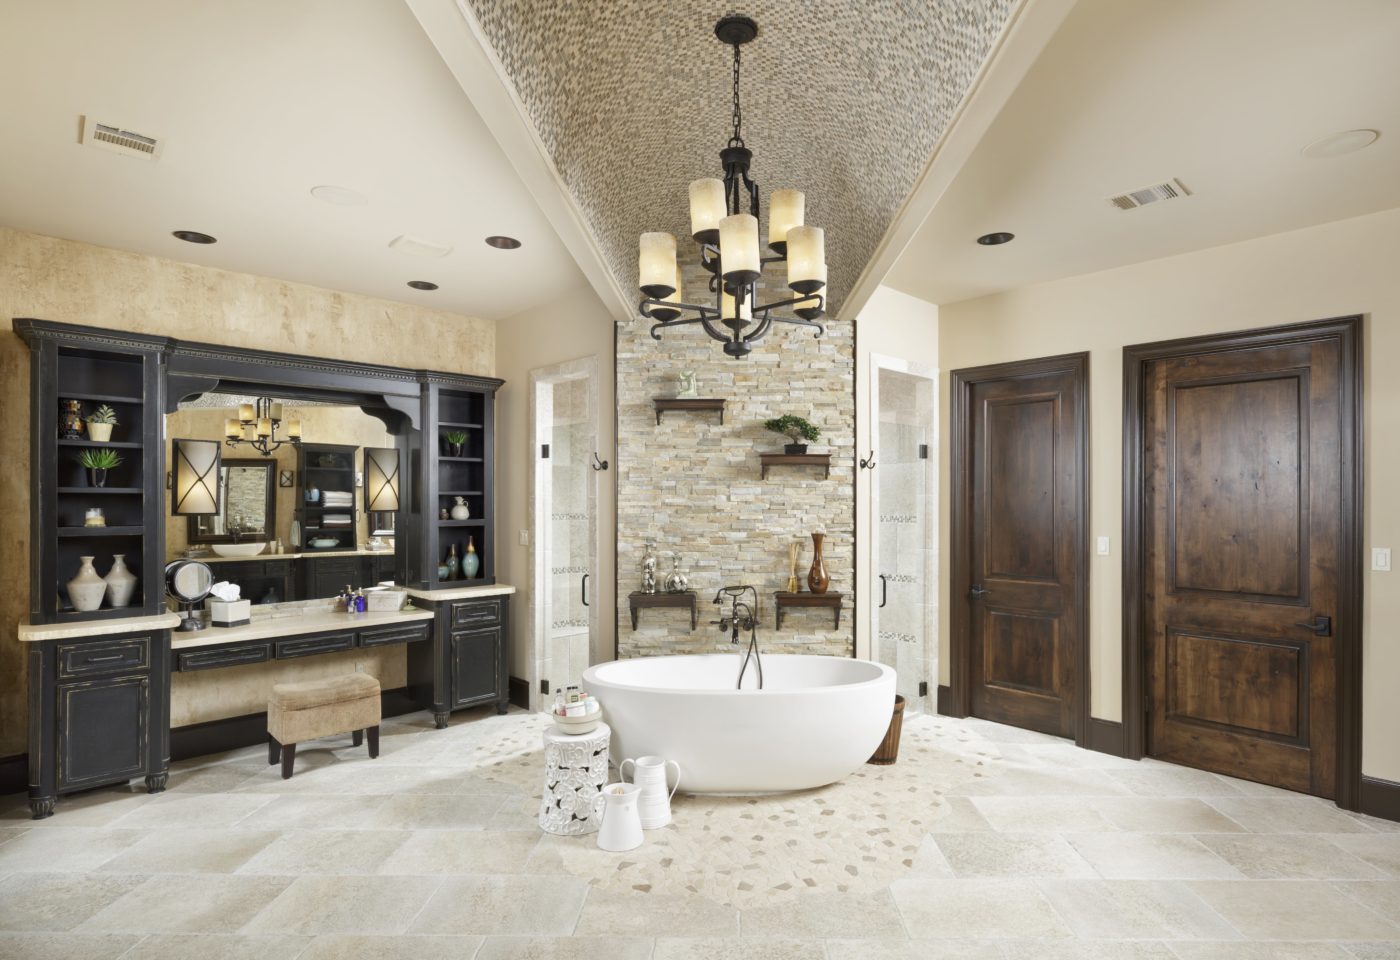 This style combines traditional elements with stone accents. Source: Architecture Art Designs